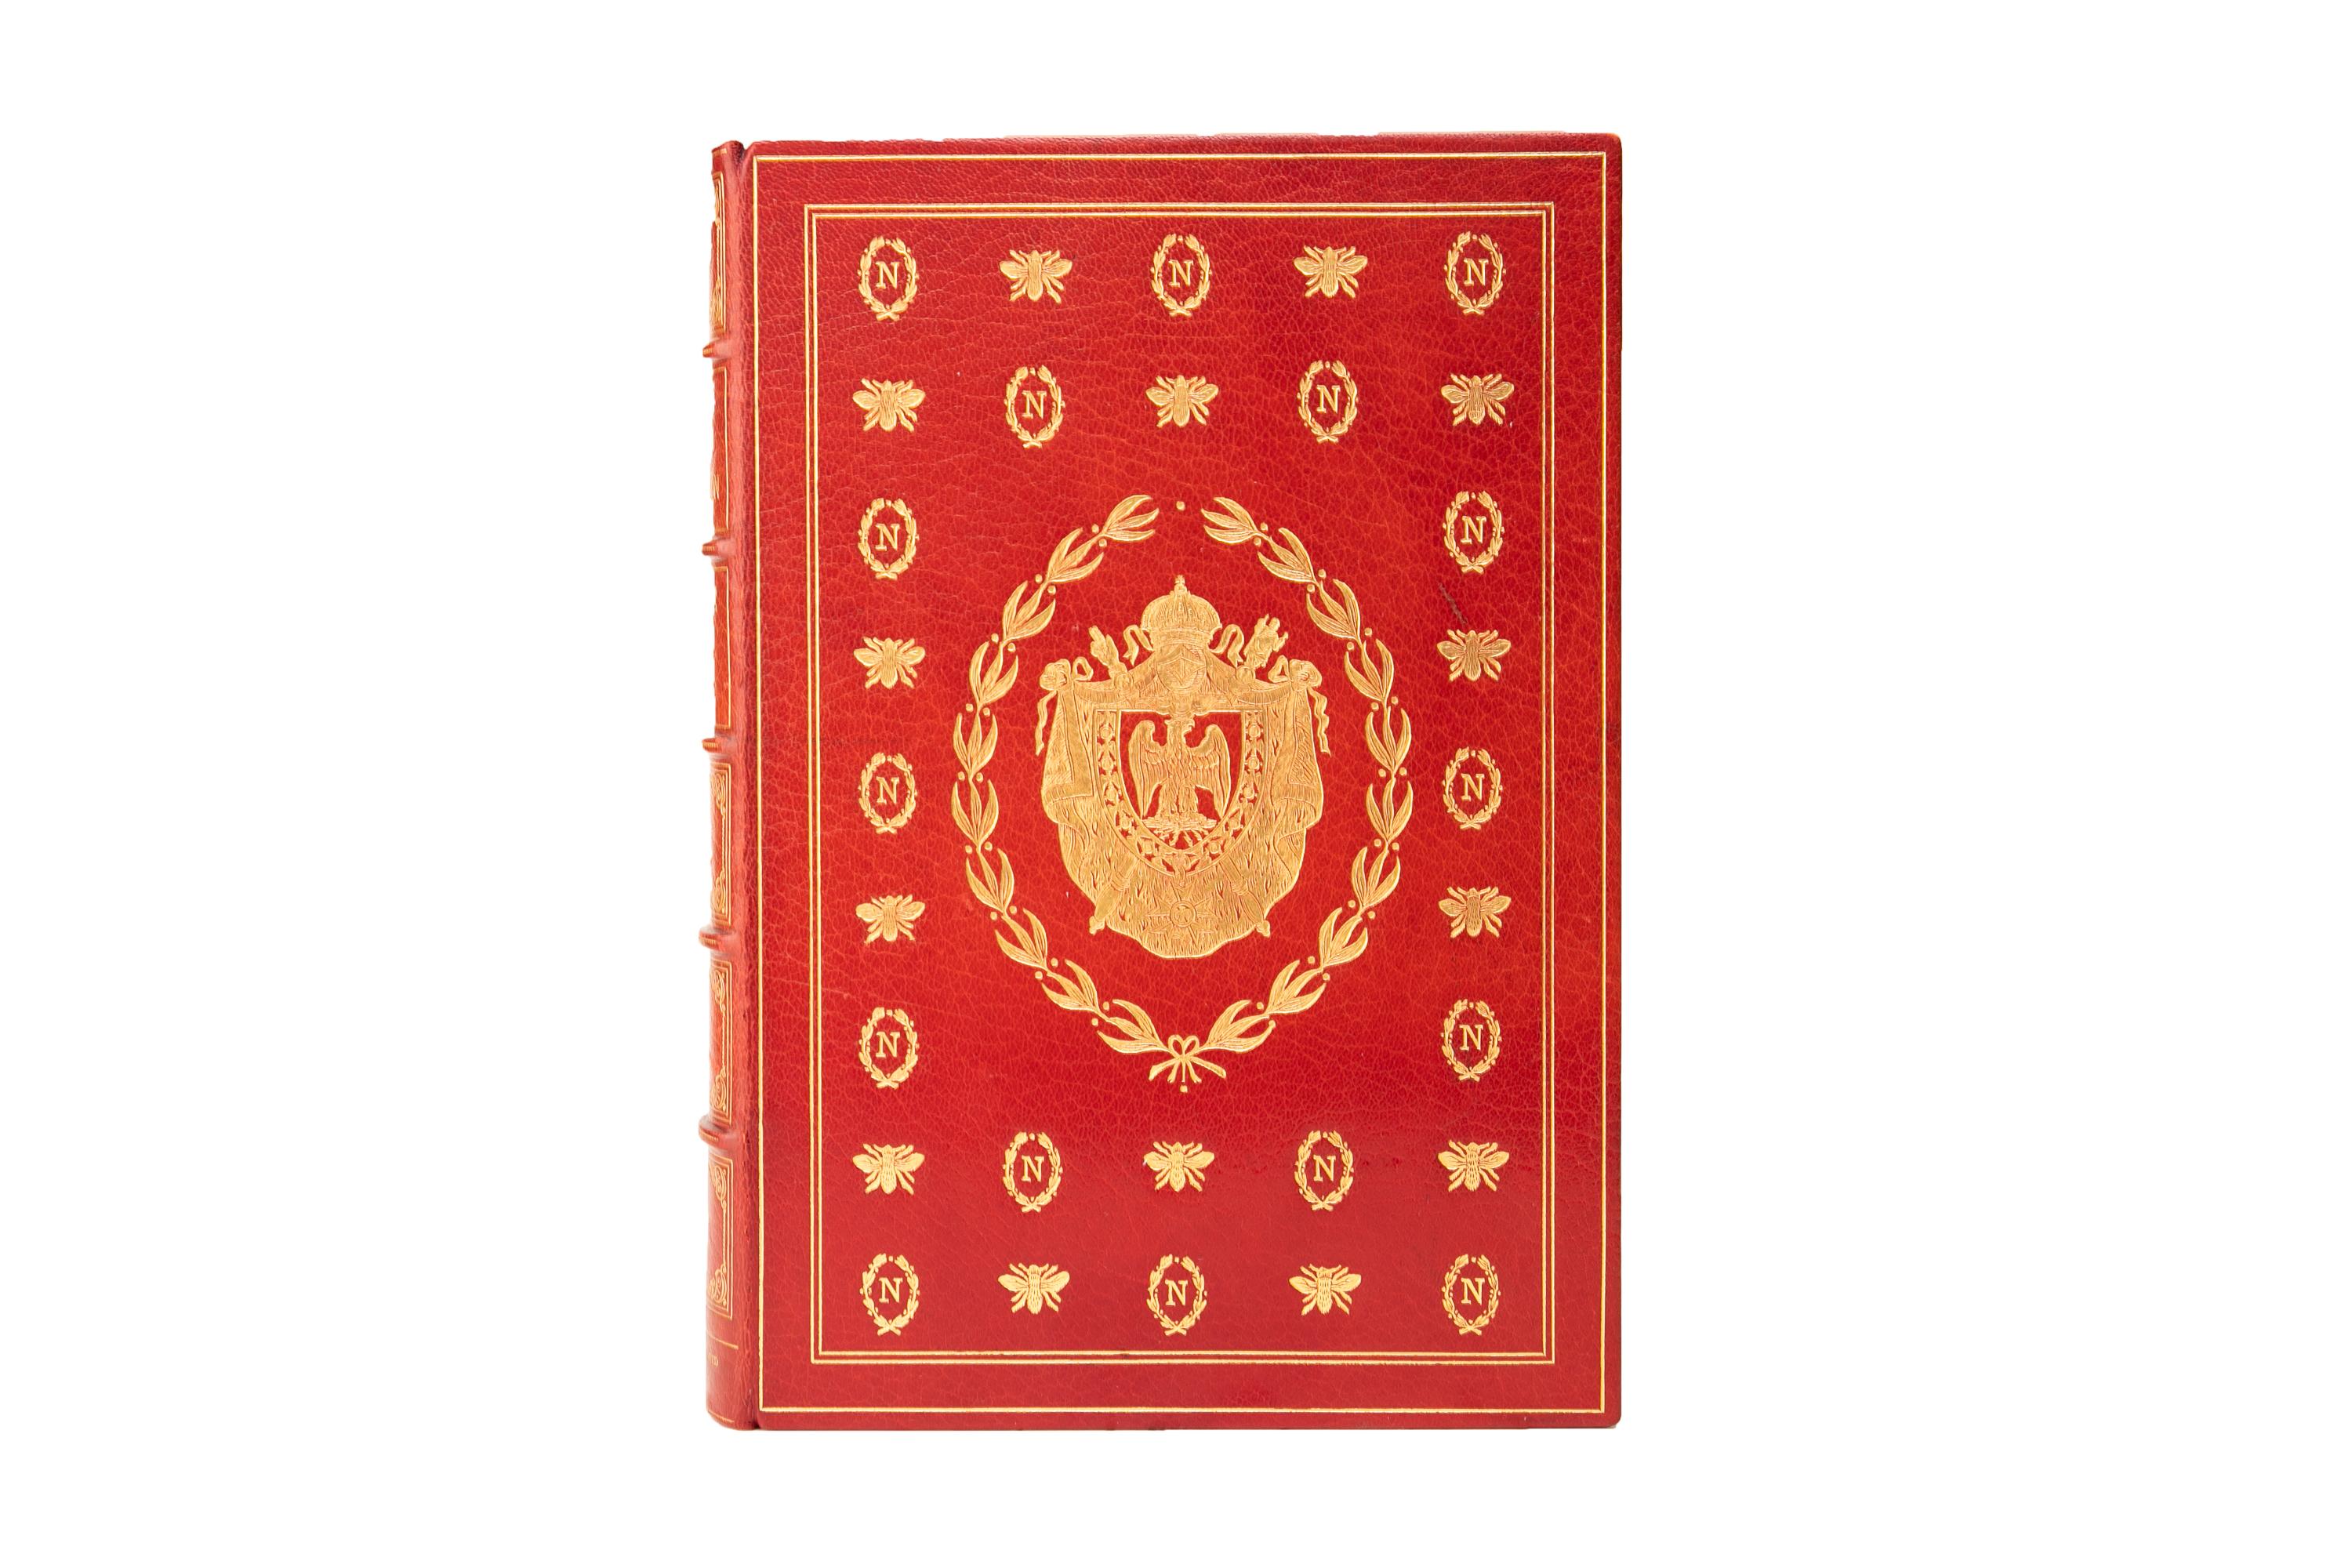 12 Volumes. William M. Sloane. Life of Napoleon.
Unique, extra-illustrated presentation set with
approximately 250 original letters and documents,
including 11 autographs of Emperor Napoleon and over 1000 portraits, views, facsimiles, maps, etc. 